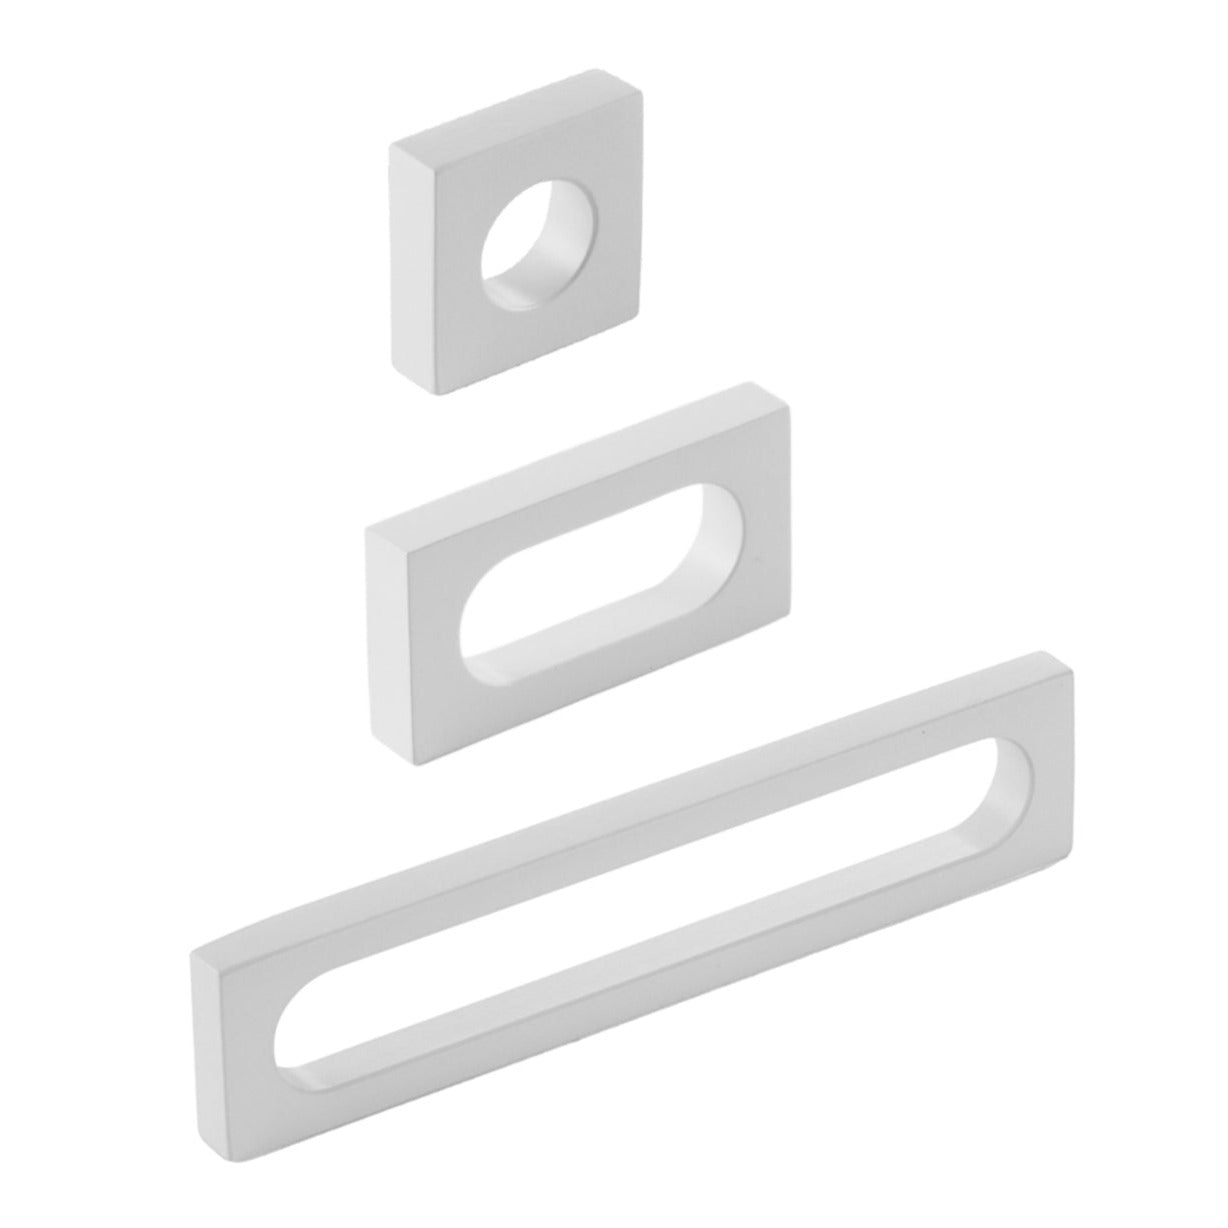 Matte White "Loop" Square Drawer Pulls and Cabinet Knobs - Industry Hardware